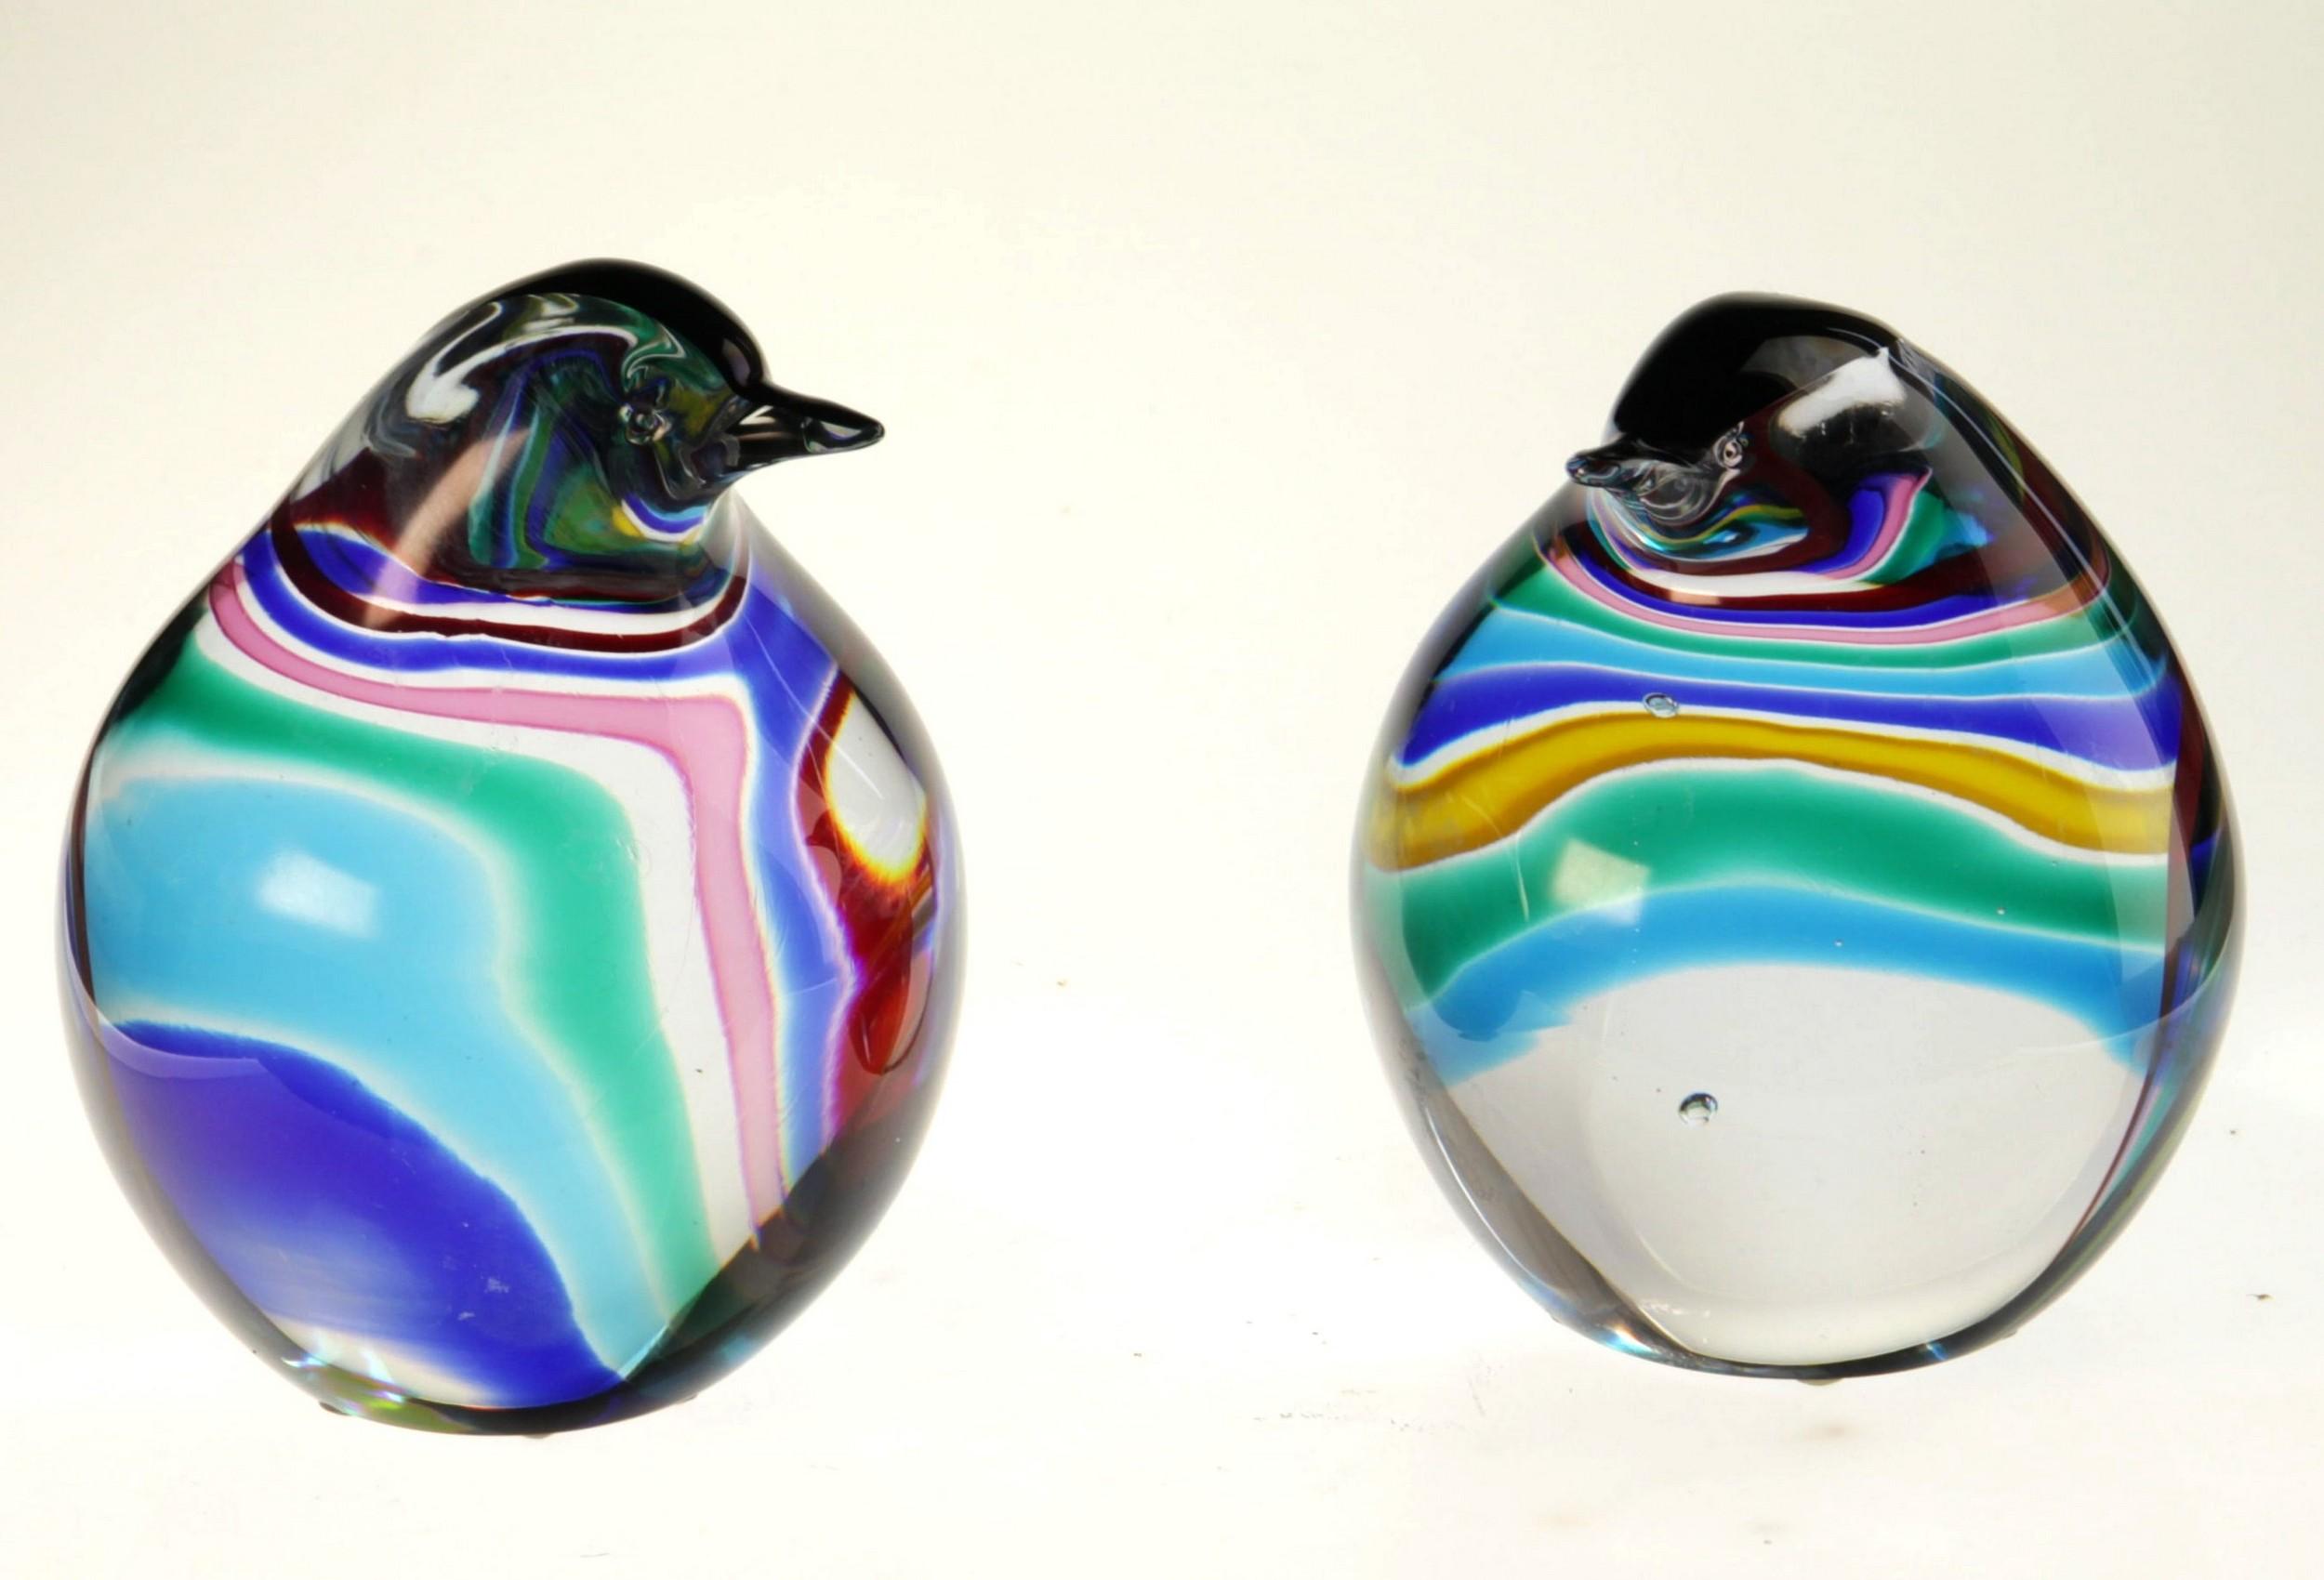 Italian Seguso for Bisazza, Pair of Penguin Chicks with Rainbow Canes 1993 Signed